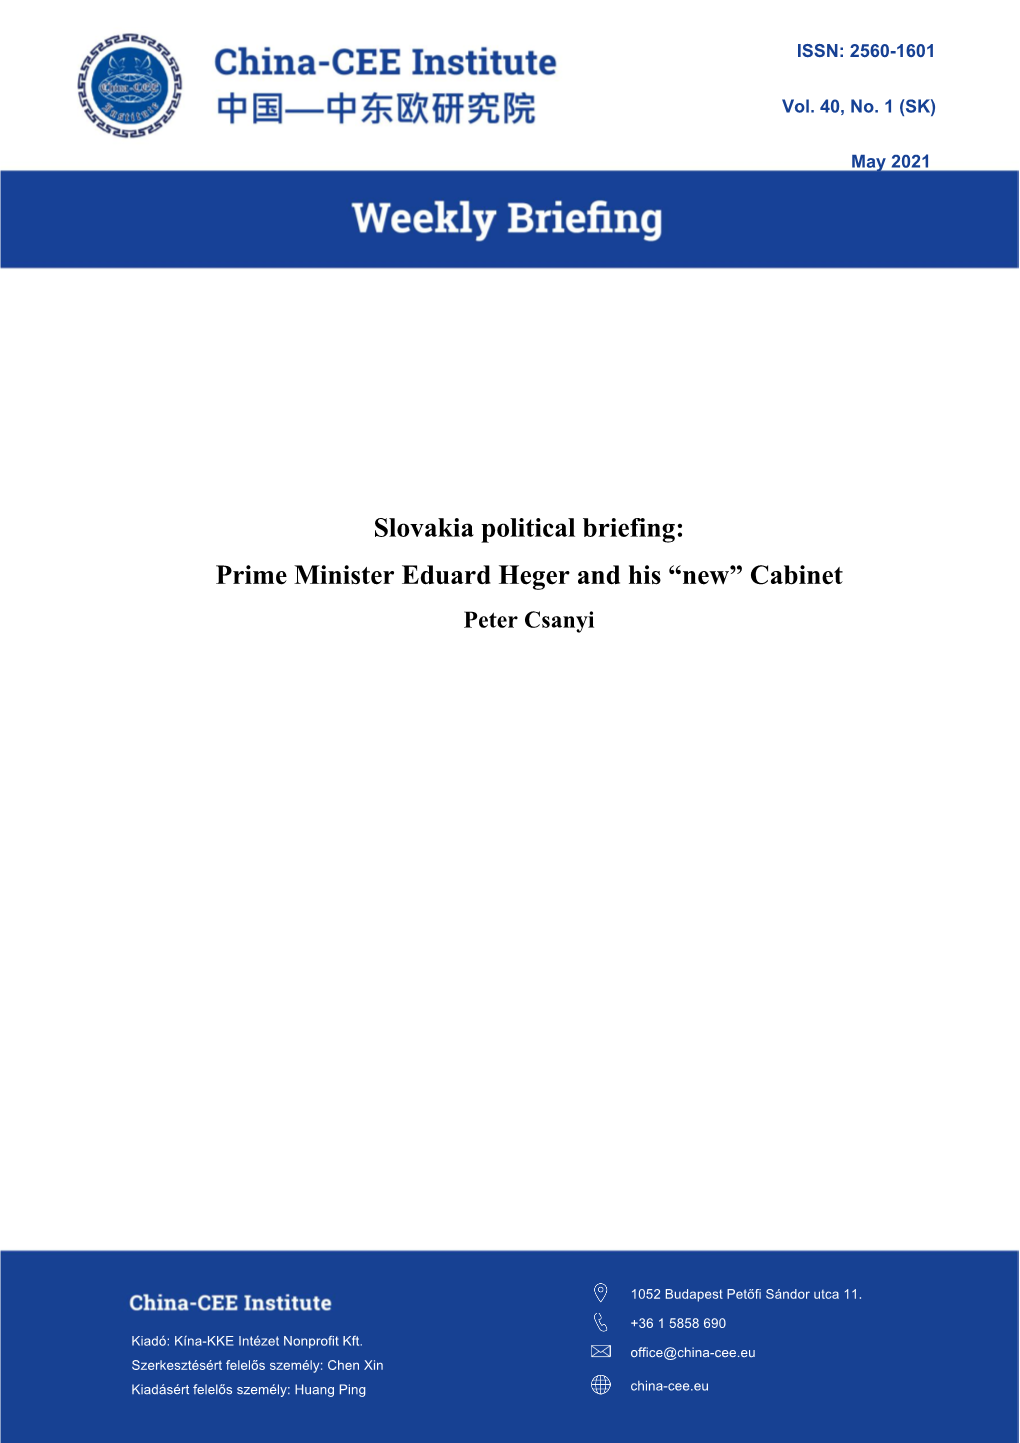 Slovakia Political Briefing: Prime Minister Eduard Heger and His “New” Cabinet Peter Csanyi